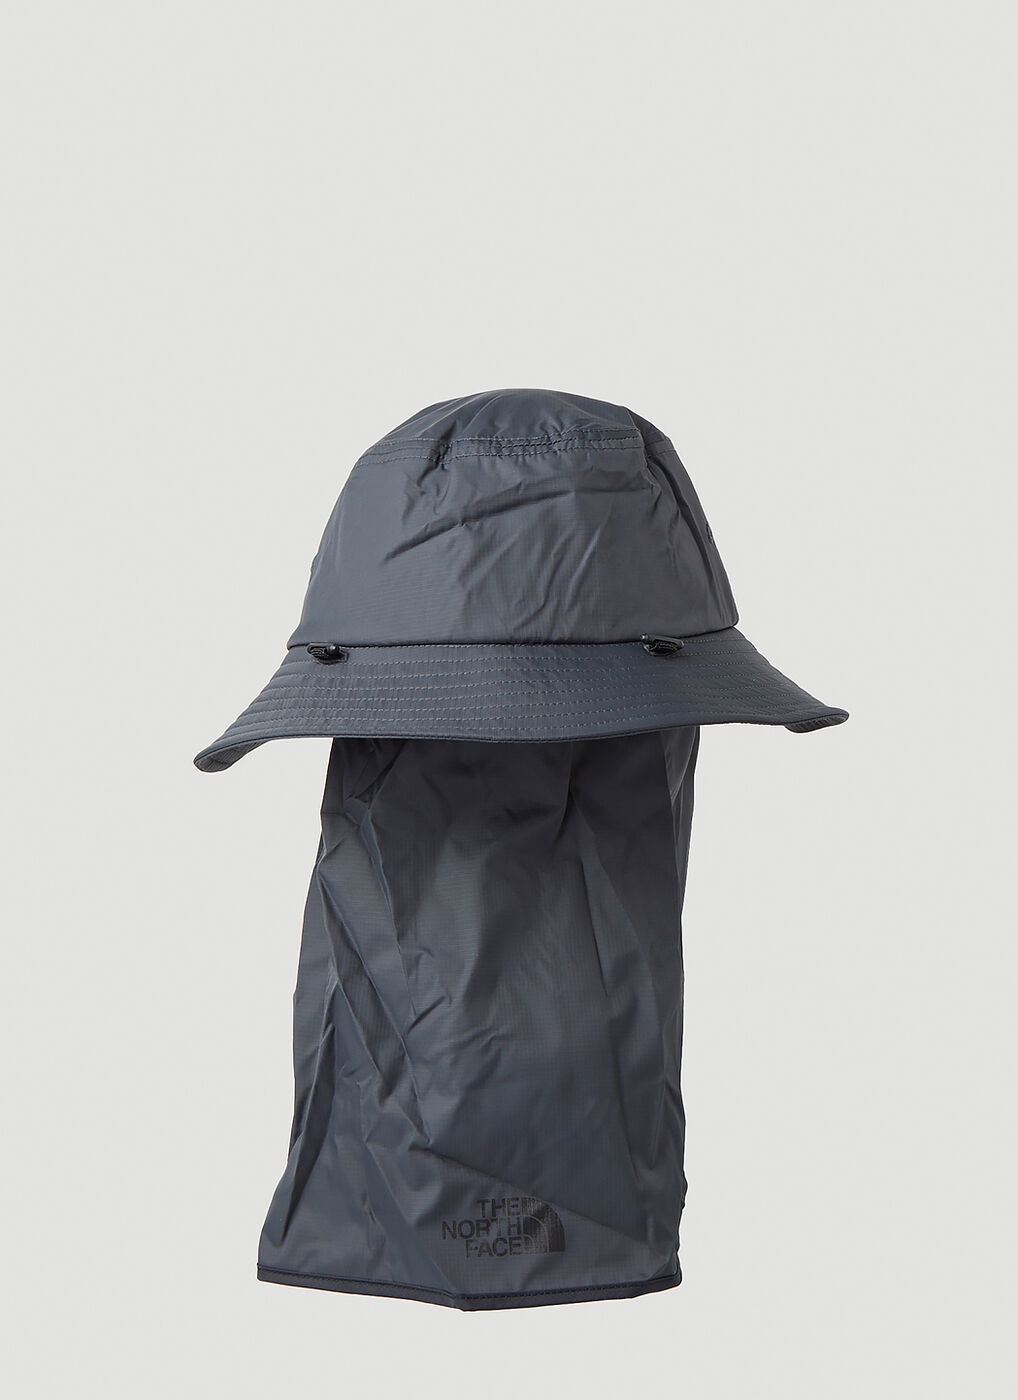 Flyweight Bucket Hat in Black The North Face